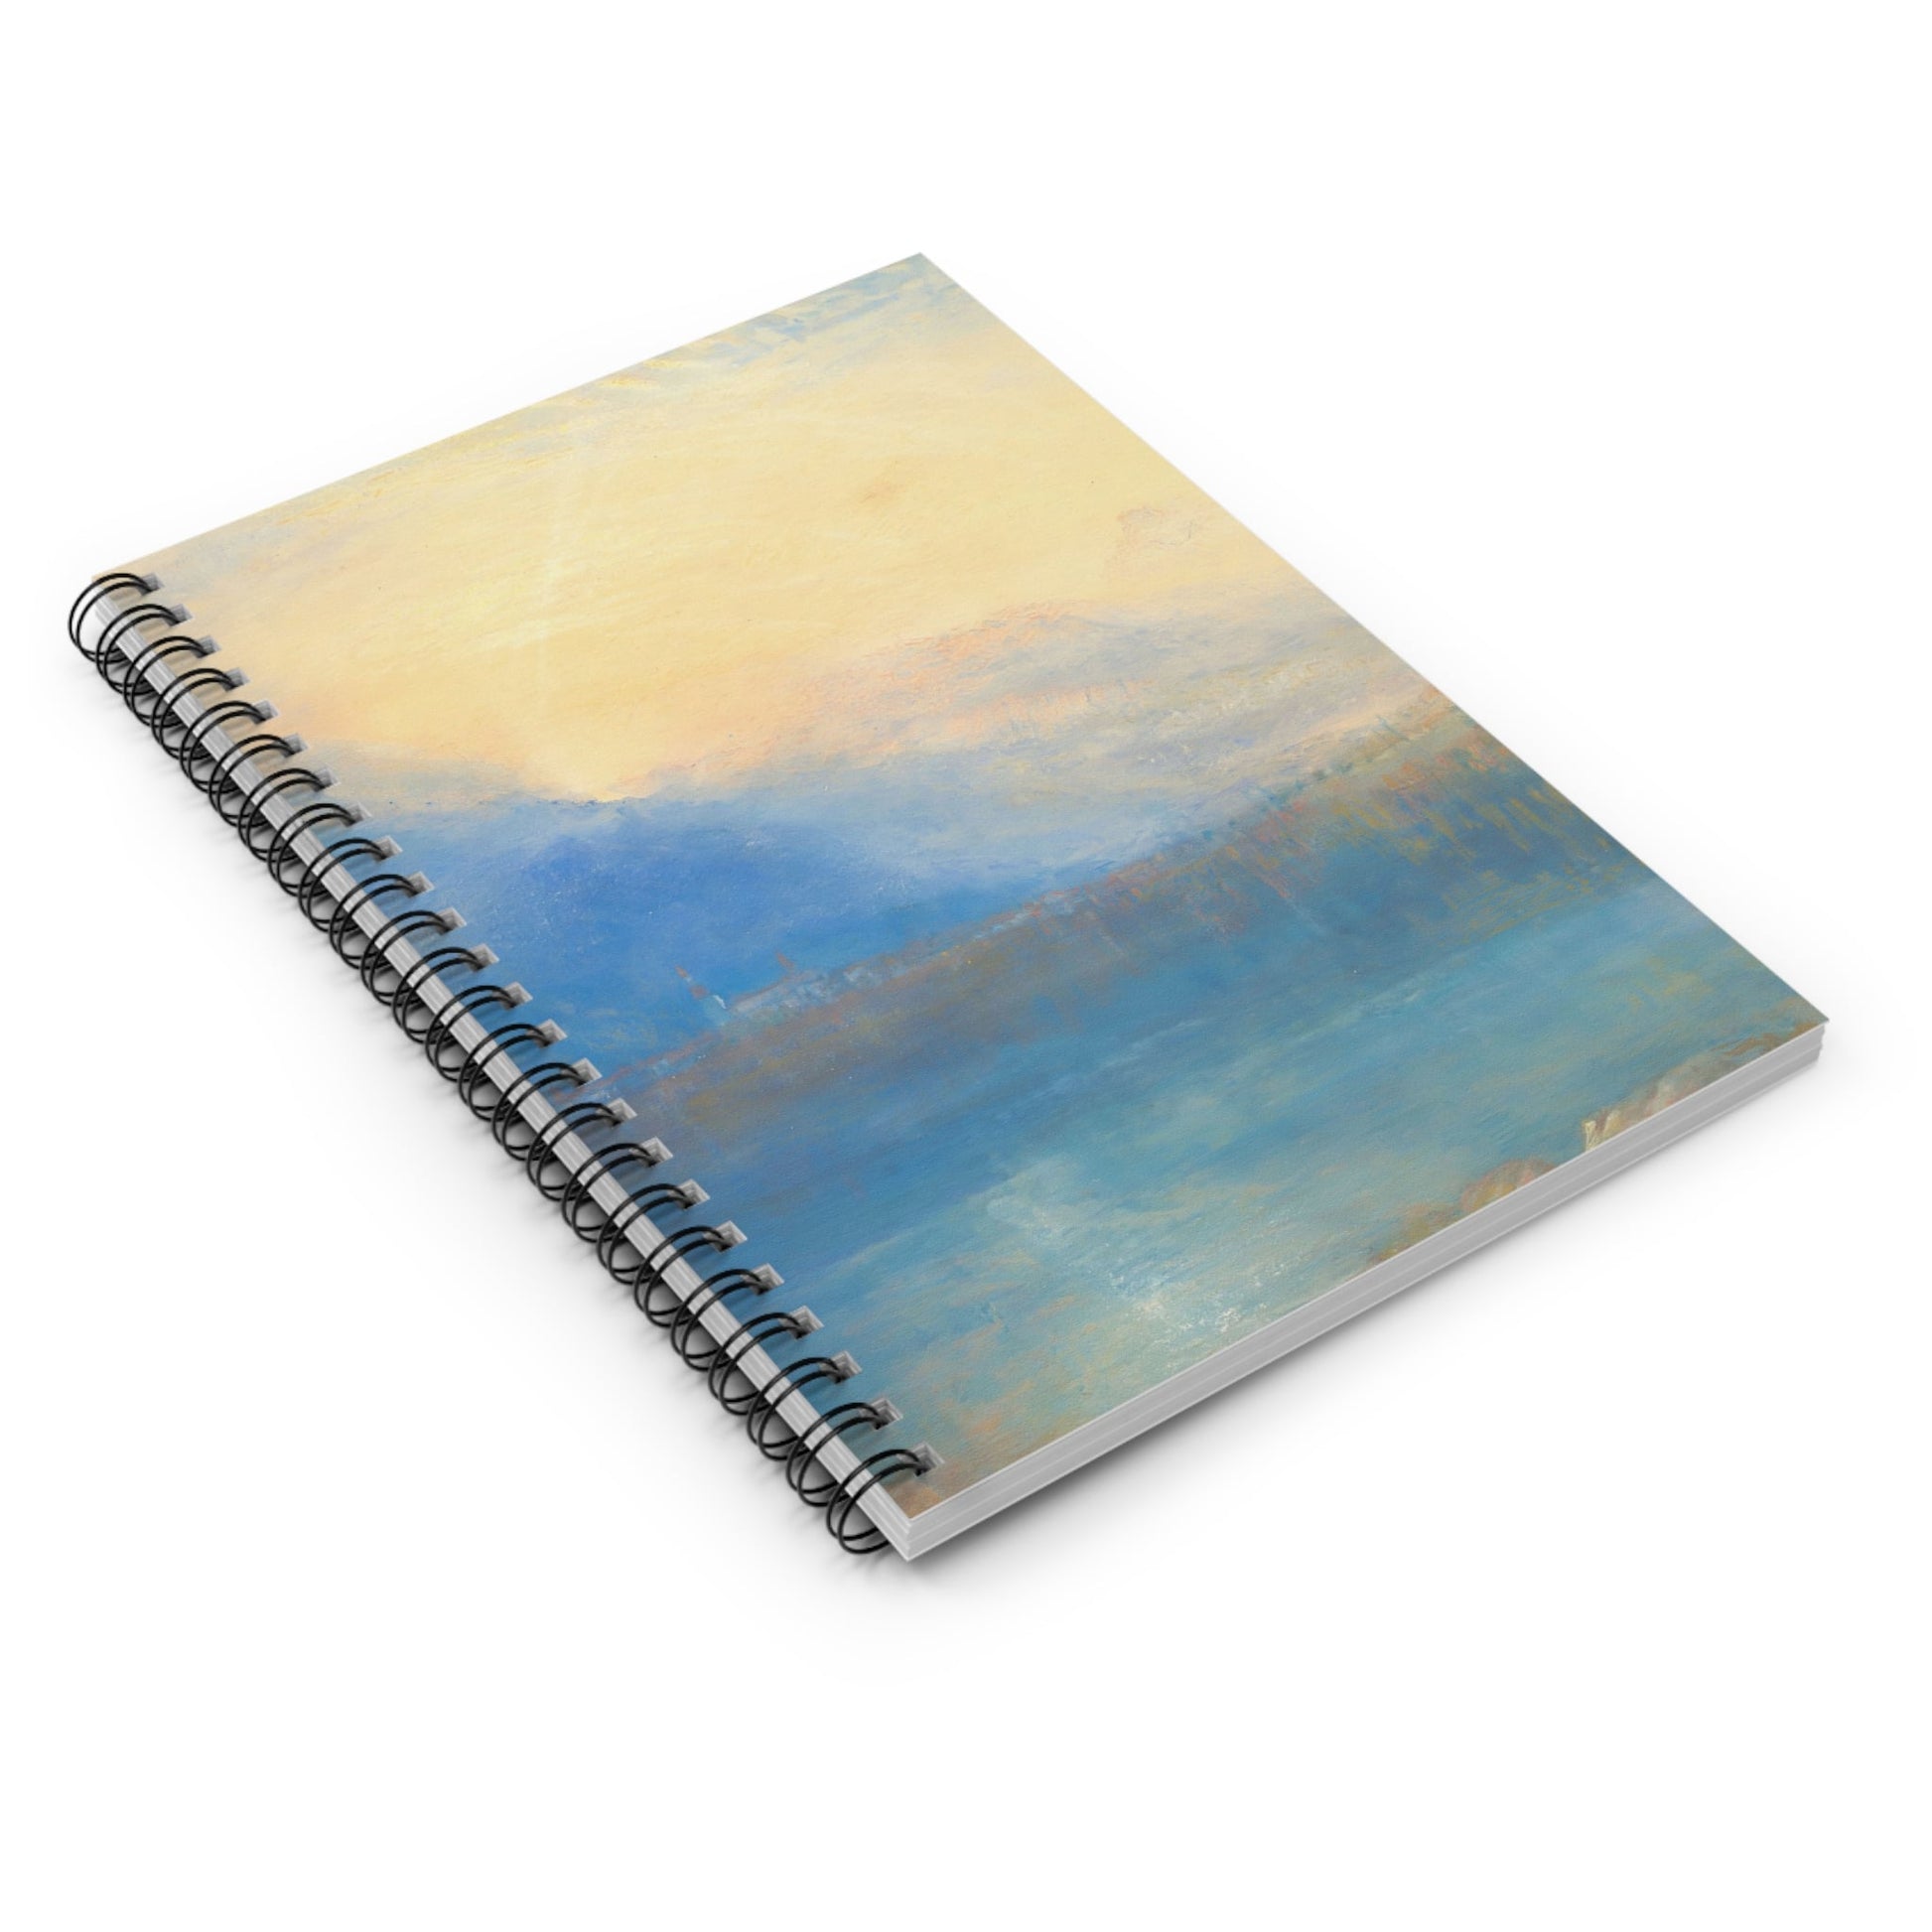 Mountain and Lake Spiral Notebook Laying Flat on White Surface